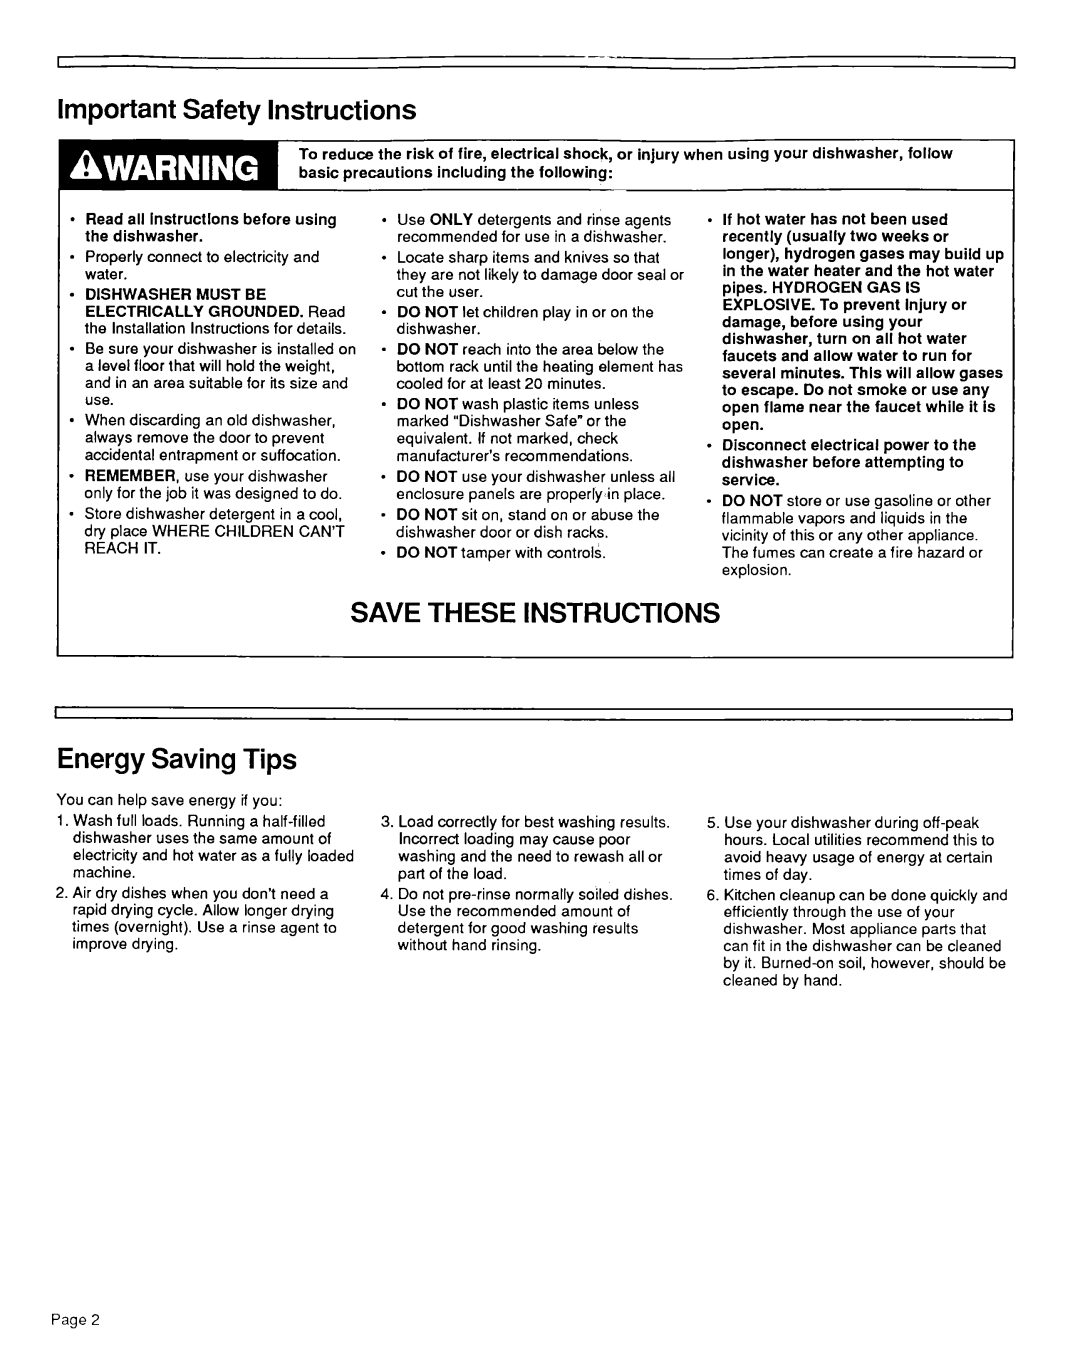 Estate TUD3OOOW installation instructions Save These Instructions, Energy Saving Tips, Safety 